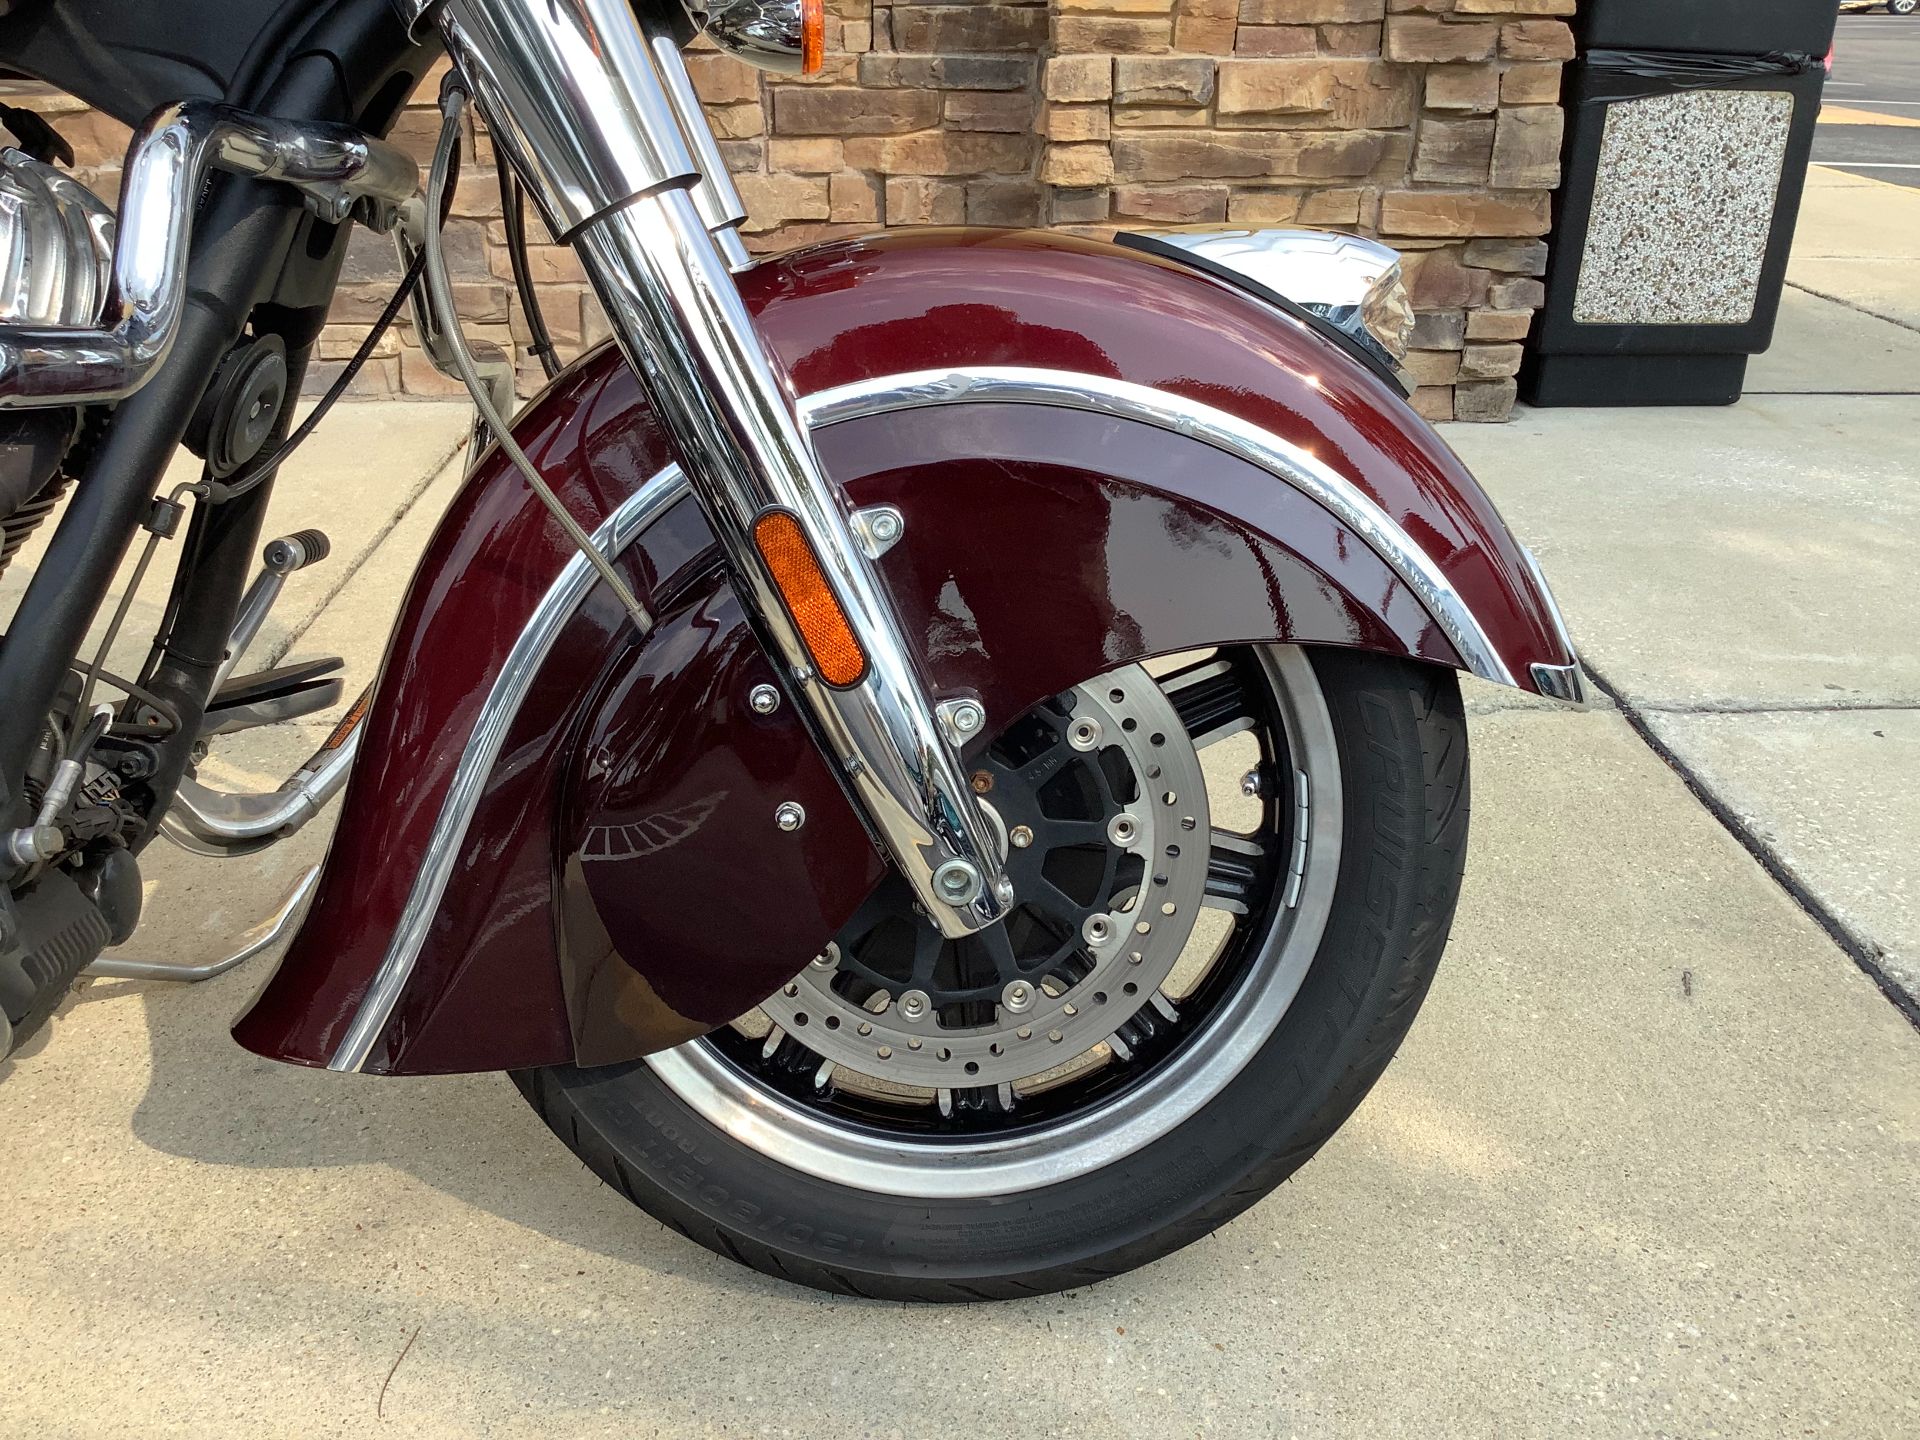 2021 Indian Motorcycle SPRINGFIELD TWO TONE in Panama City Beach, Florida - Photo 6